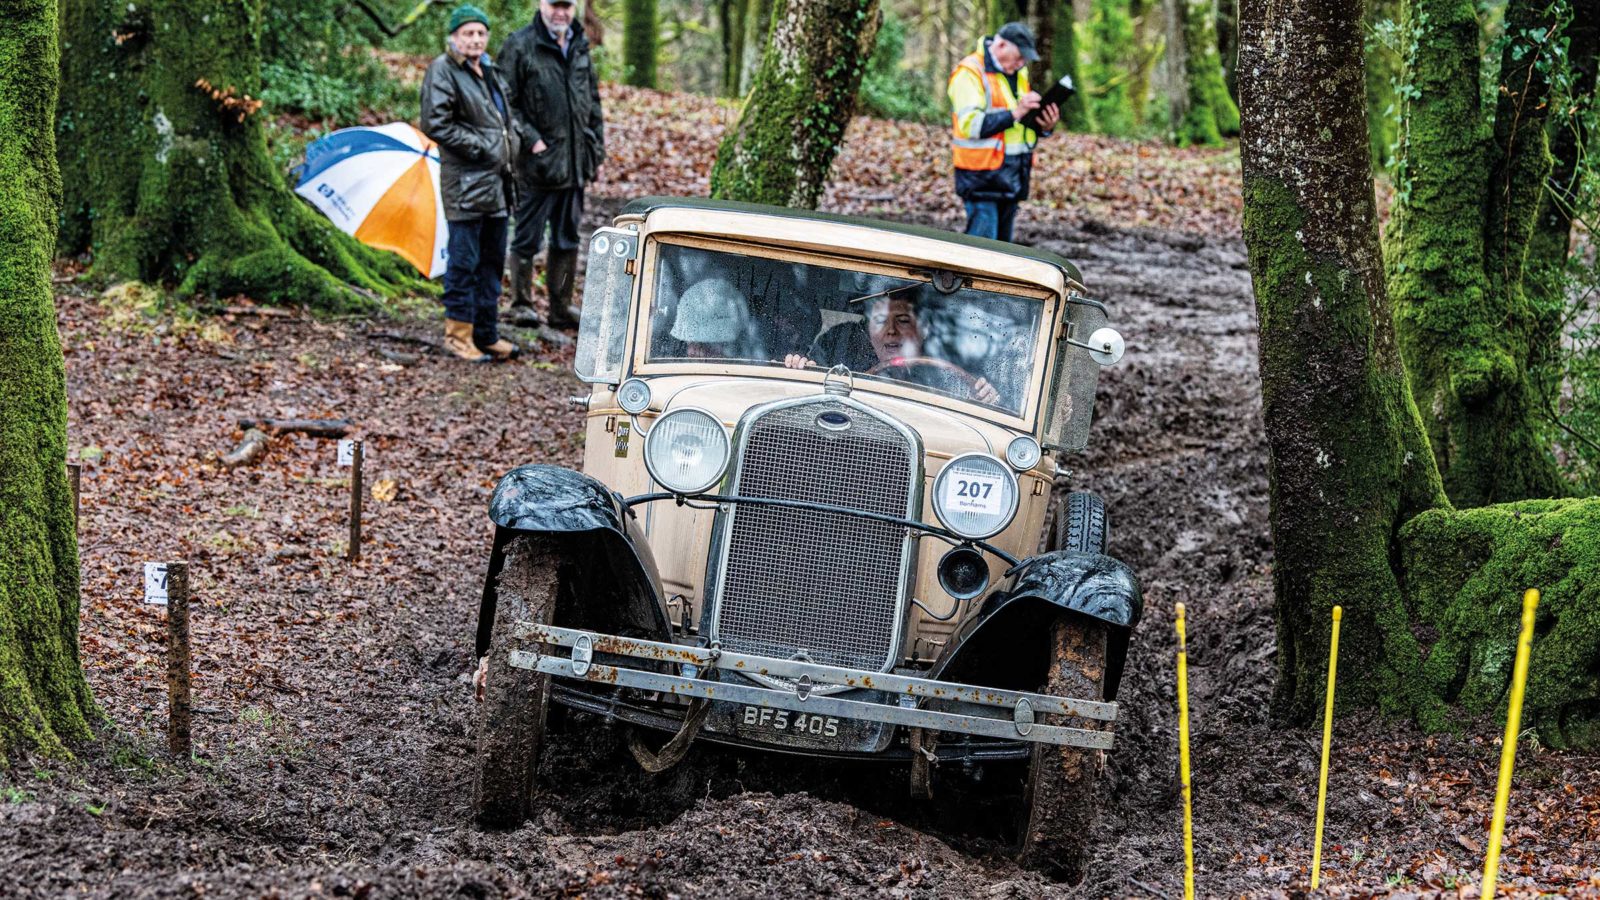 1930 Ford Model A in the mud